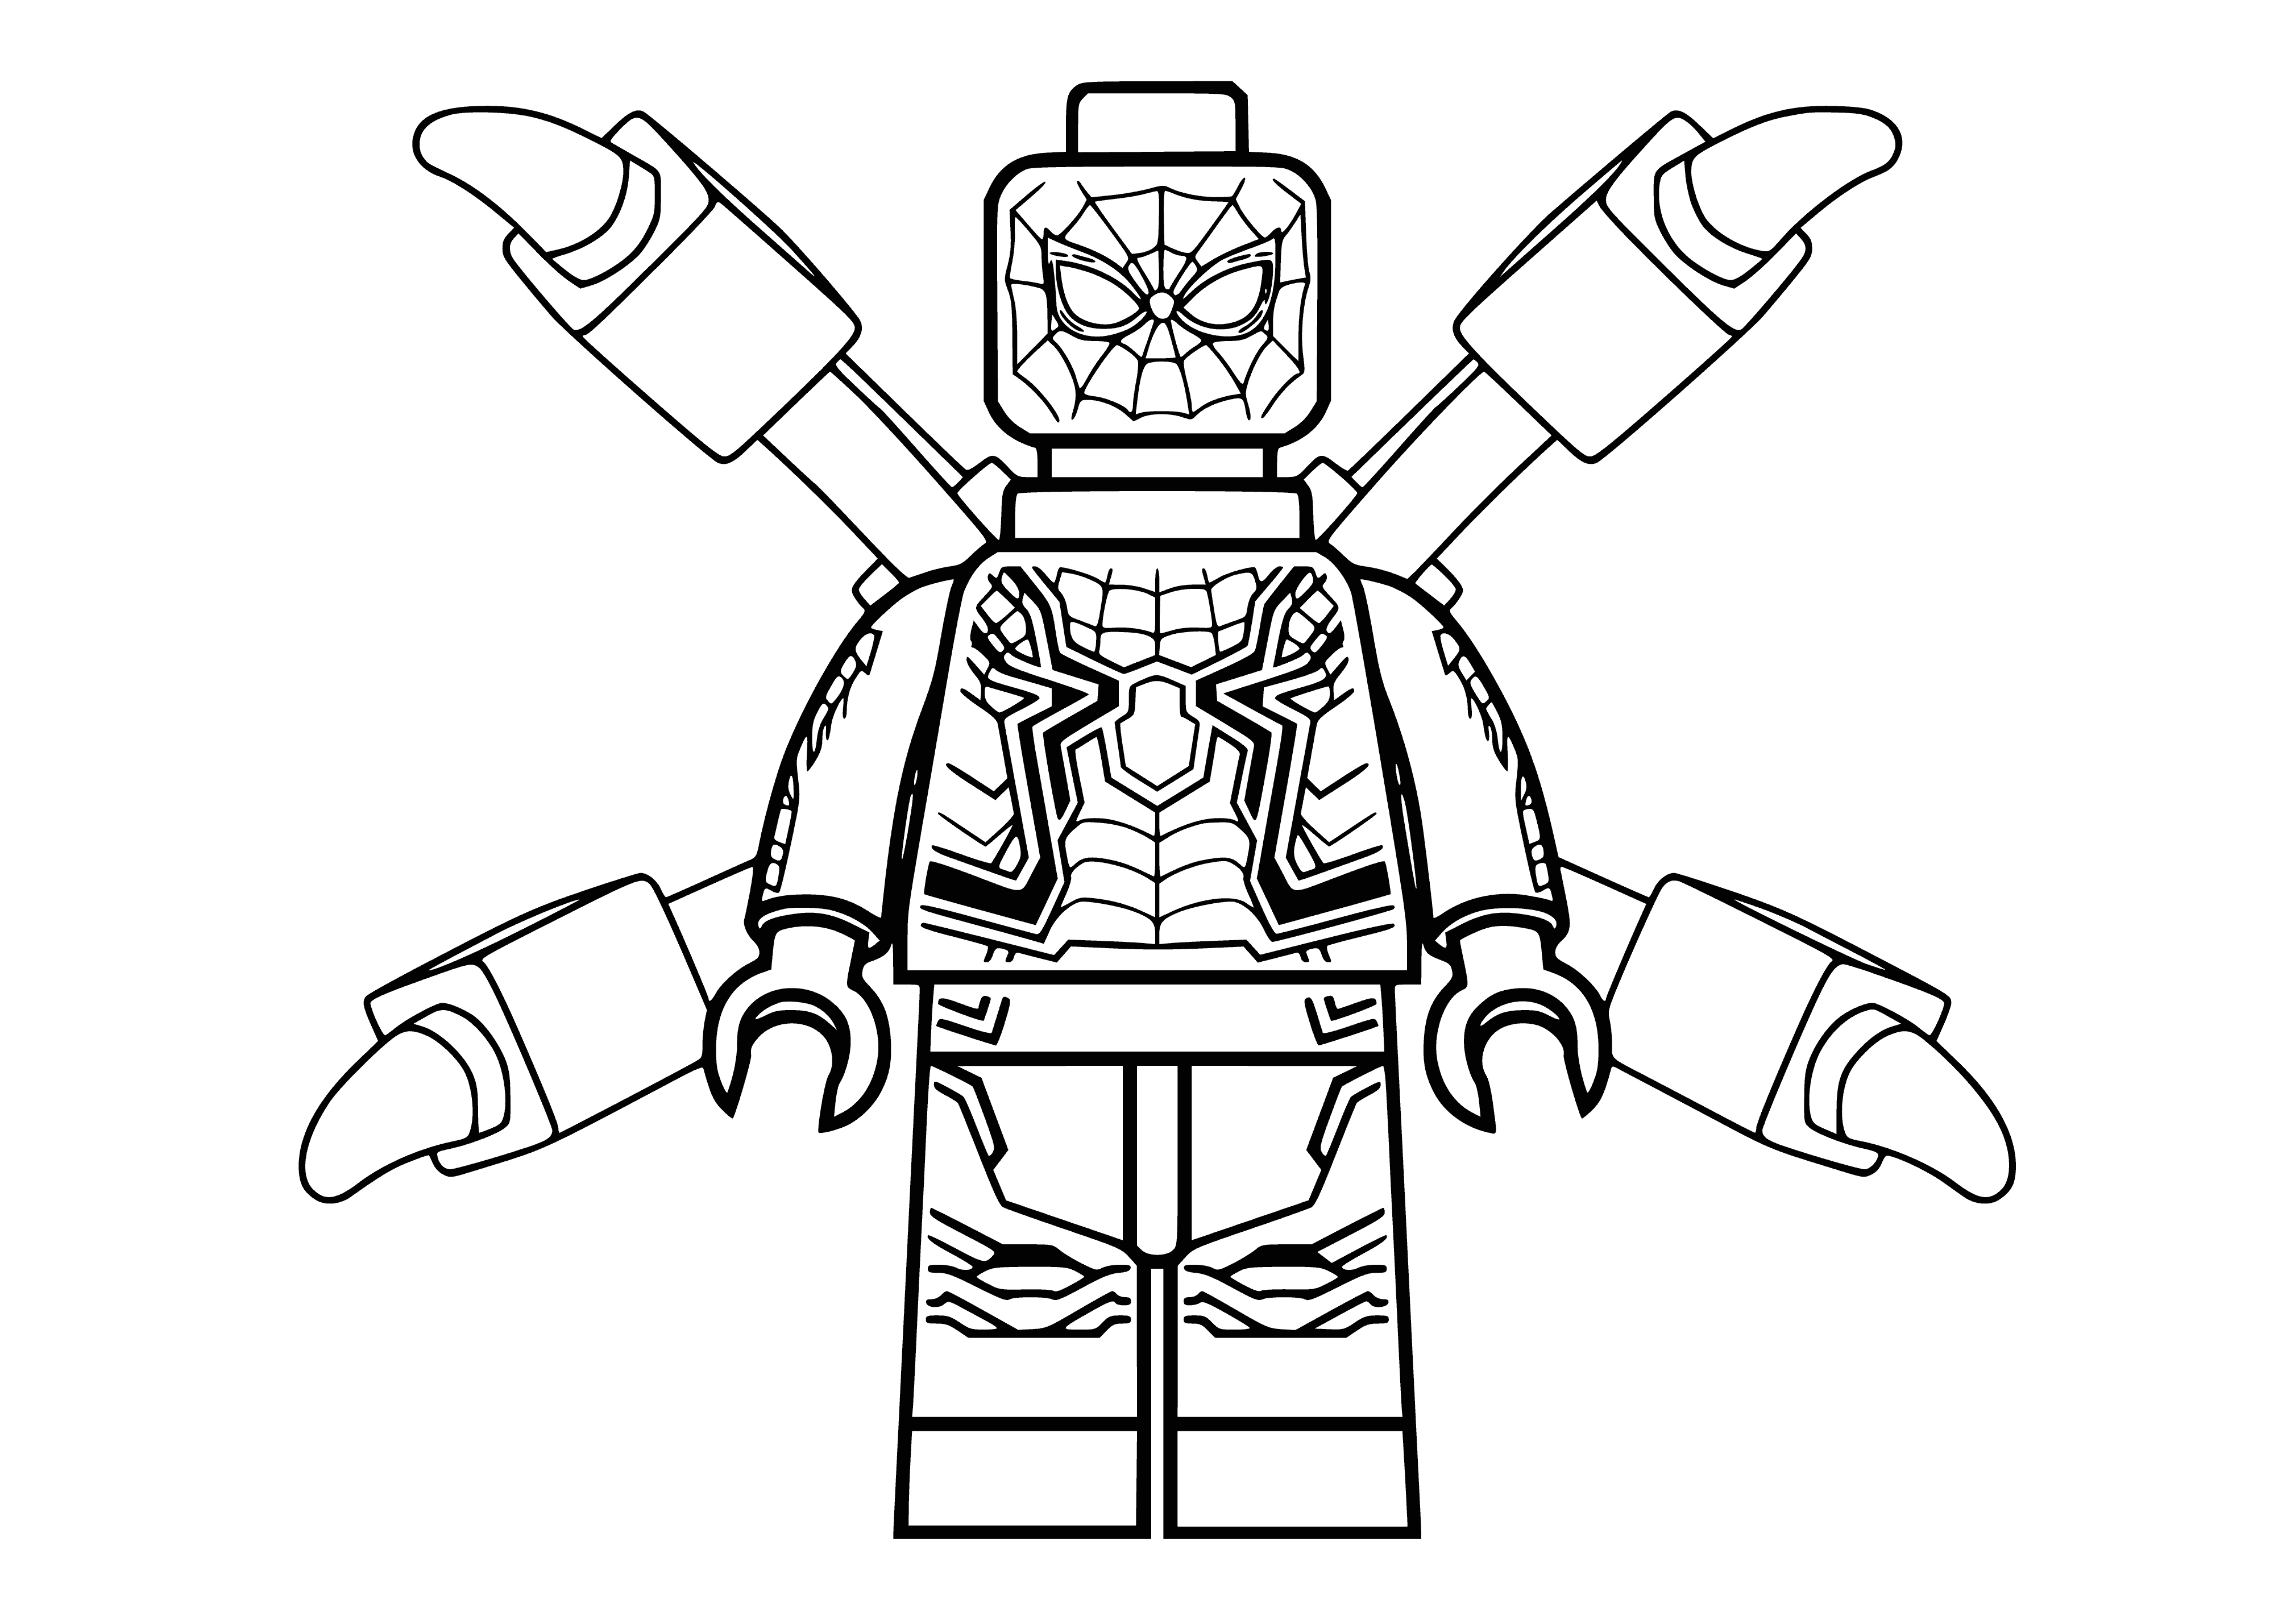 coloring page: Spiderman stands tall on building in red & blue suit, spider symbol on chest. Long thin arms & legs, red & blue webbing from wrists.